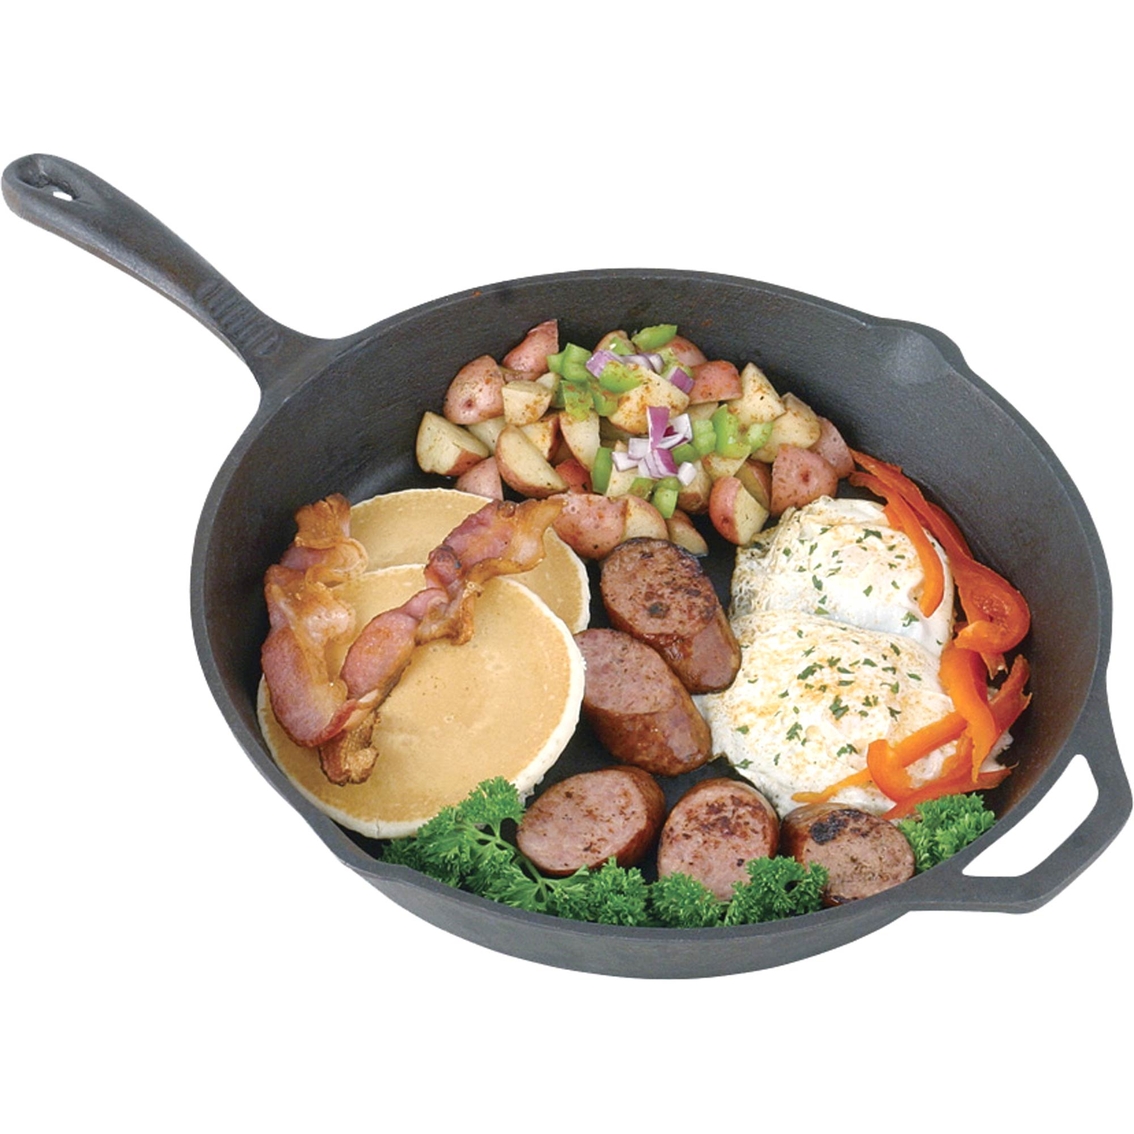 Camp Chef National Parks Cast Iron Set - Image 2 of 4